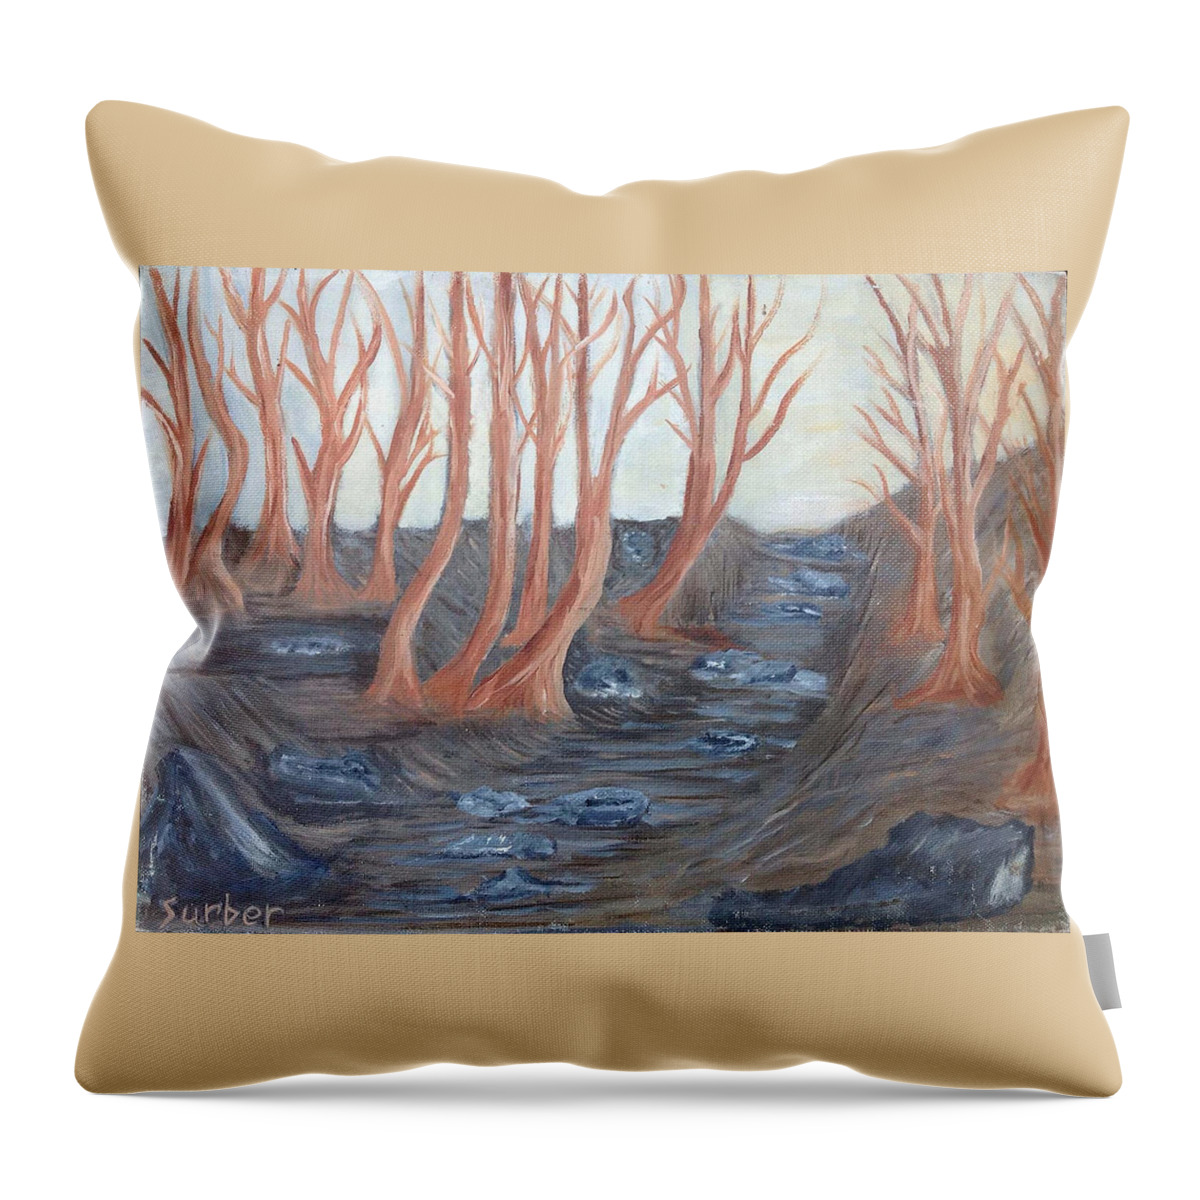 Tree Throw Pillow featuring the painting Old Road Through the Trees by Suzanne Surber